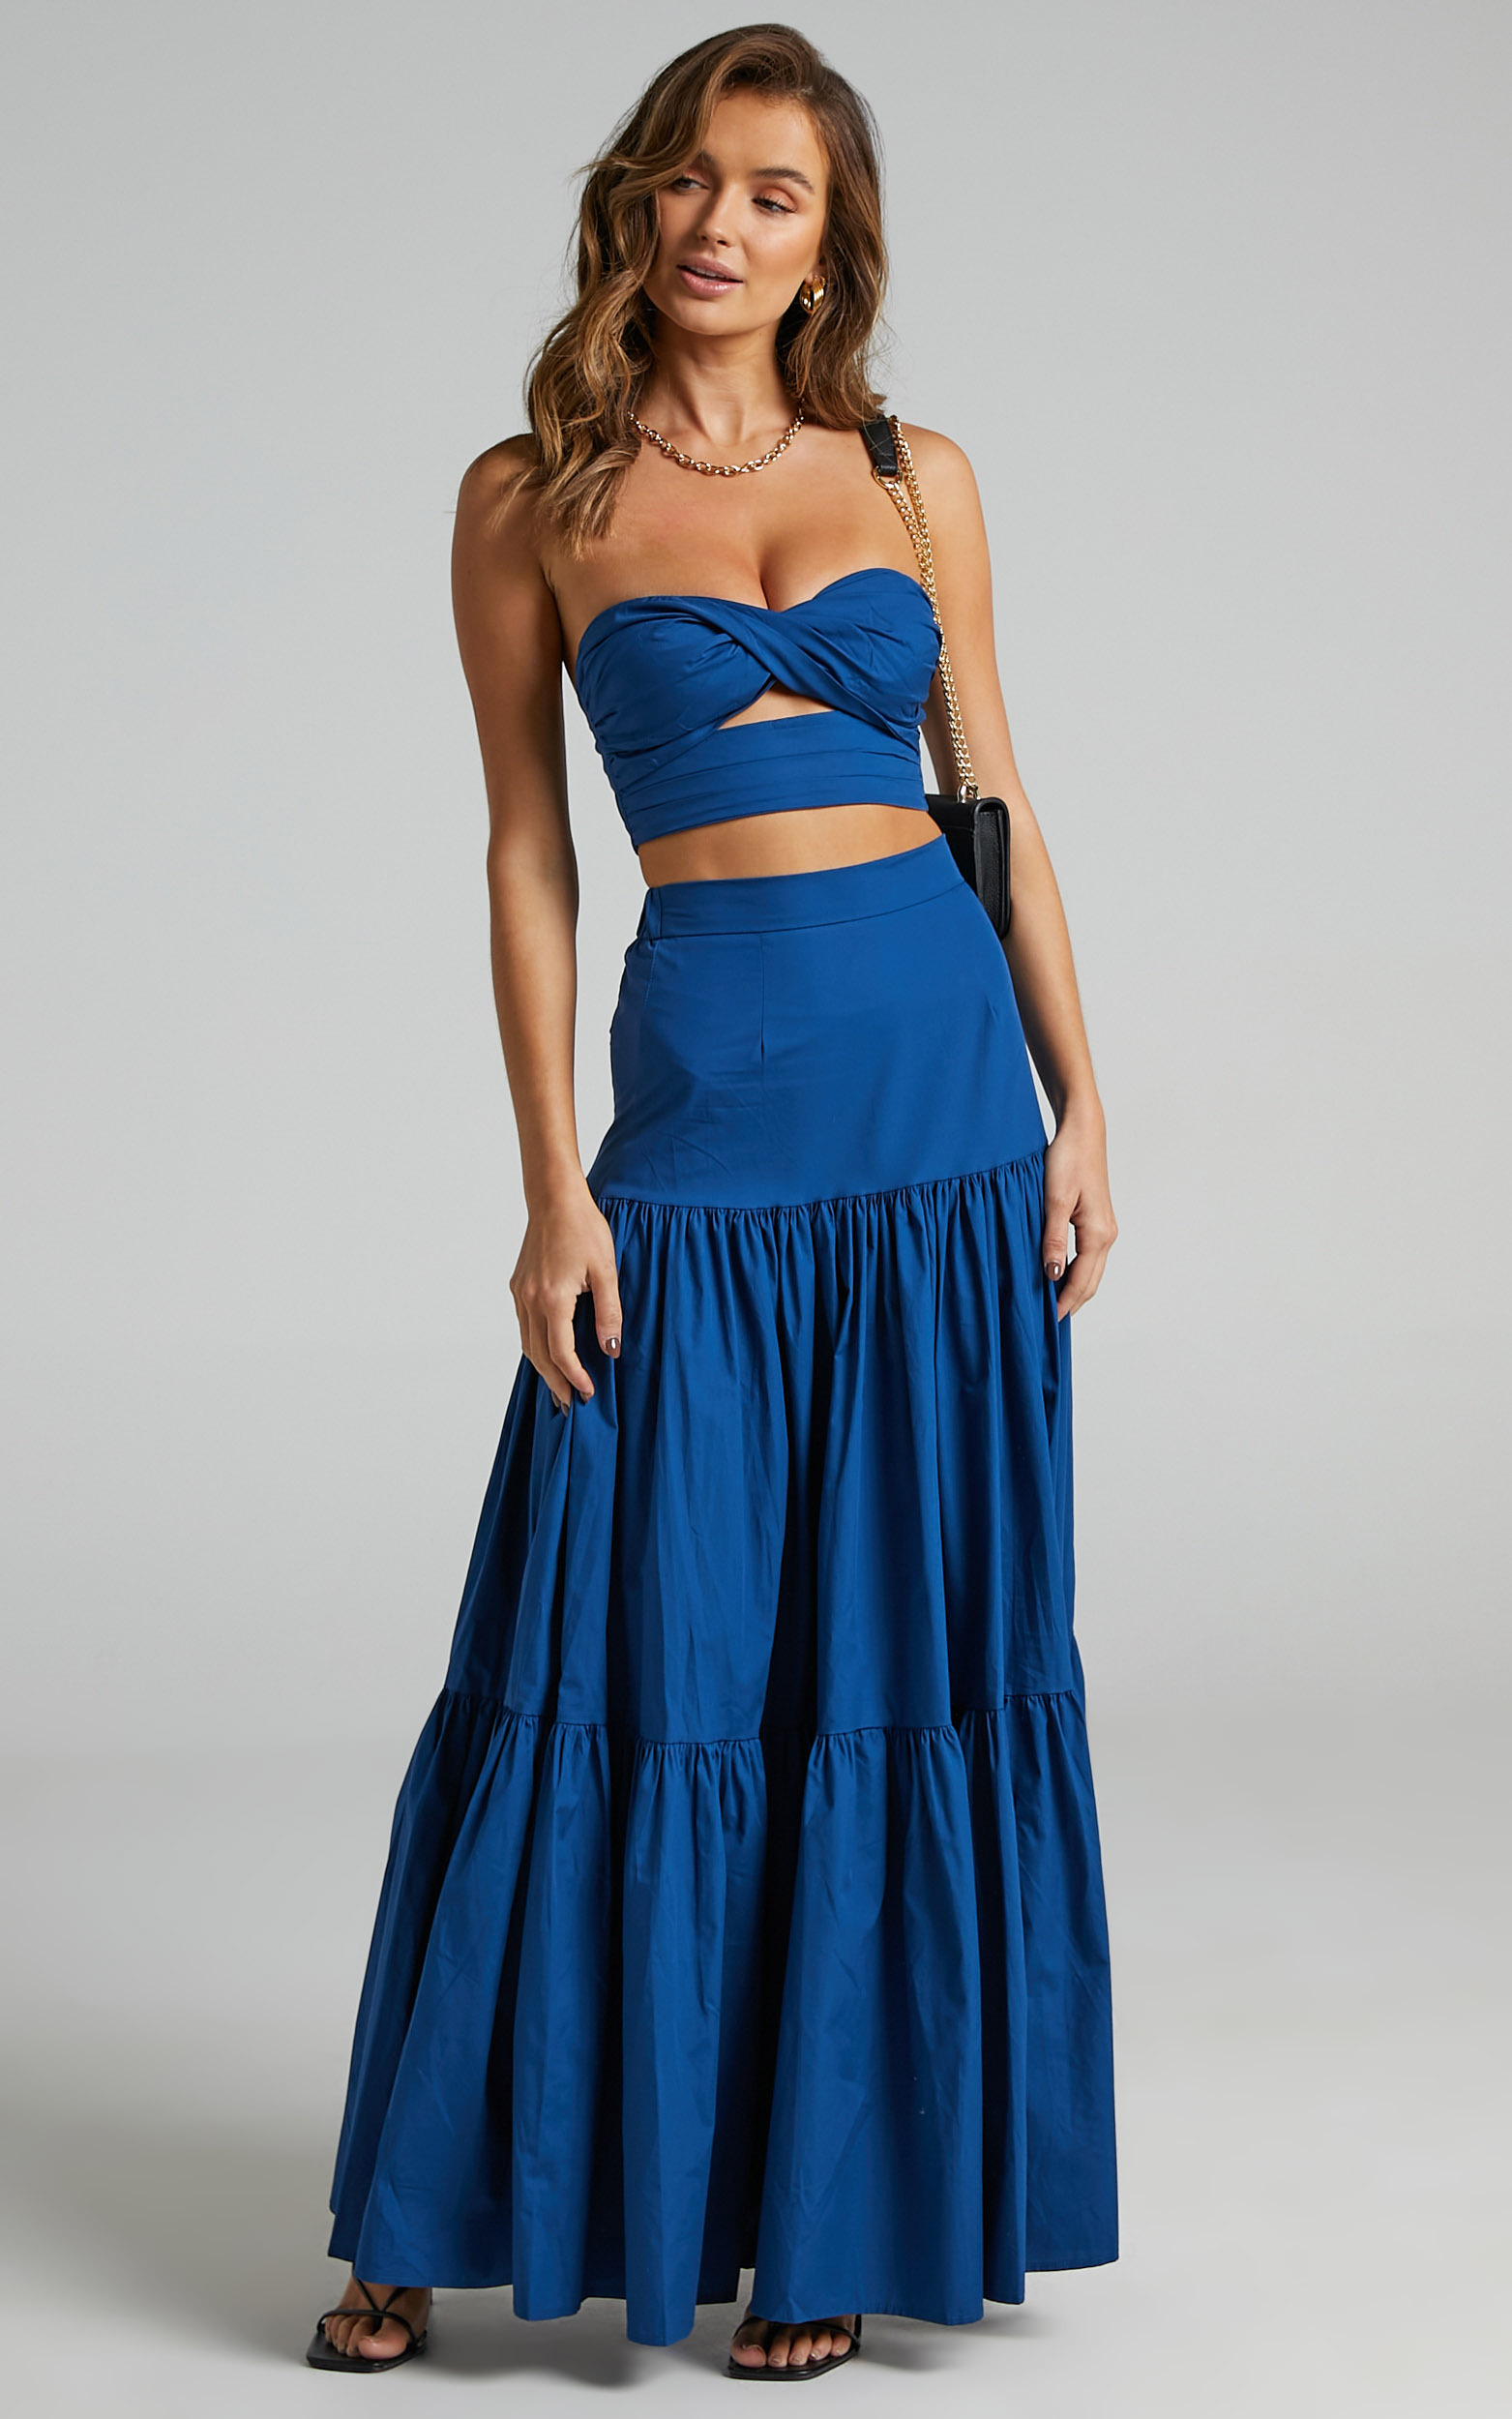 Runaway The Label - Ayla Top in Sapphire - L, BLU1, hi-res image number null